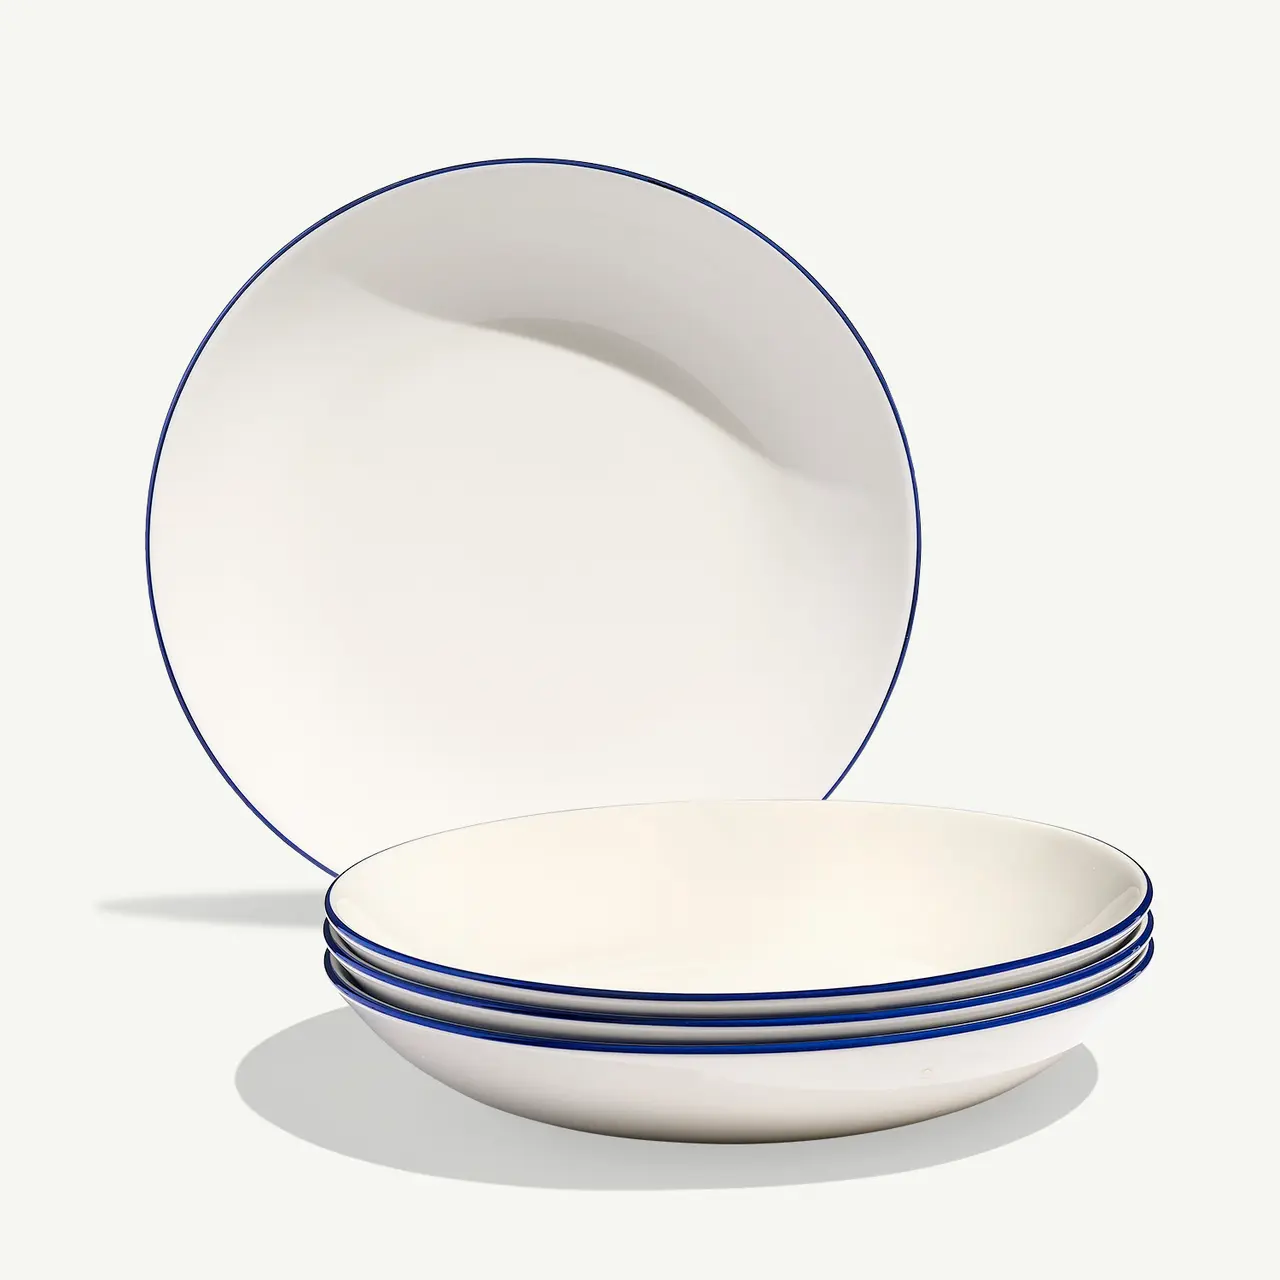 A stack of simple white plates with blue trim lines is displayed against a light background.